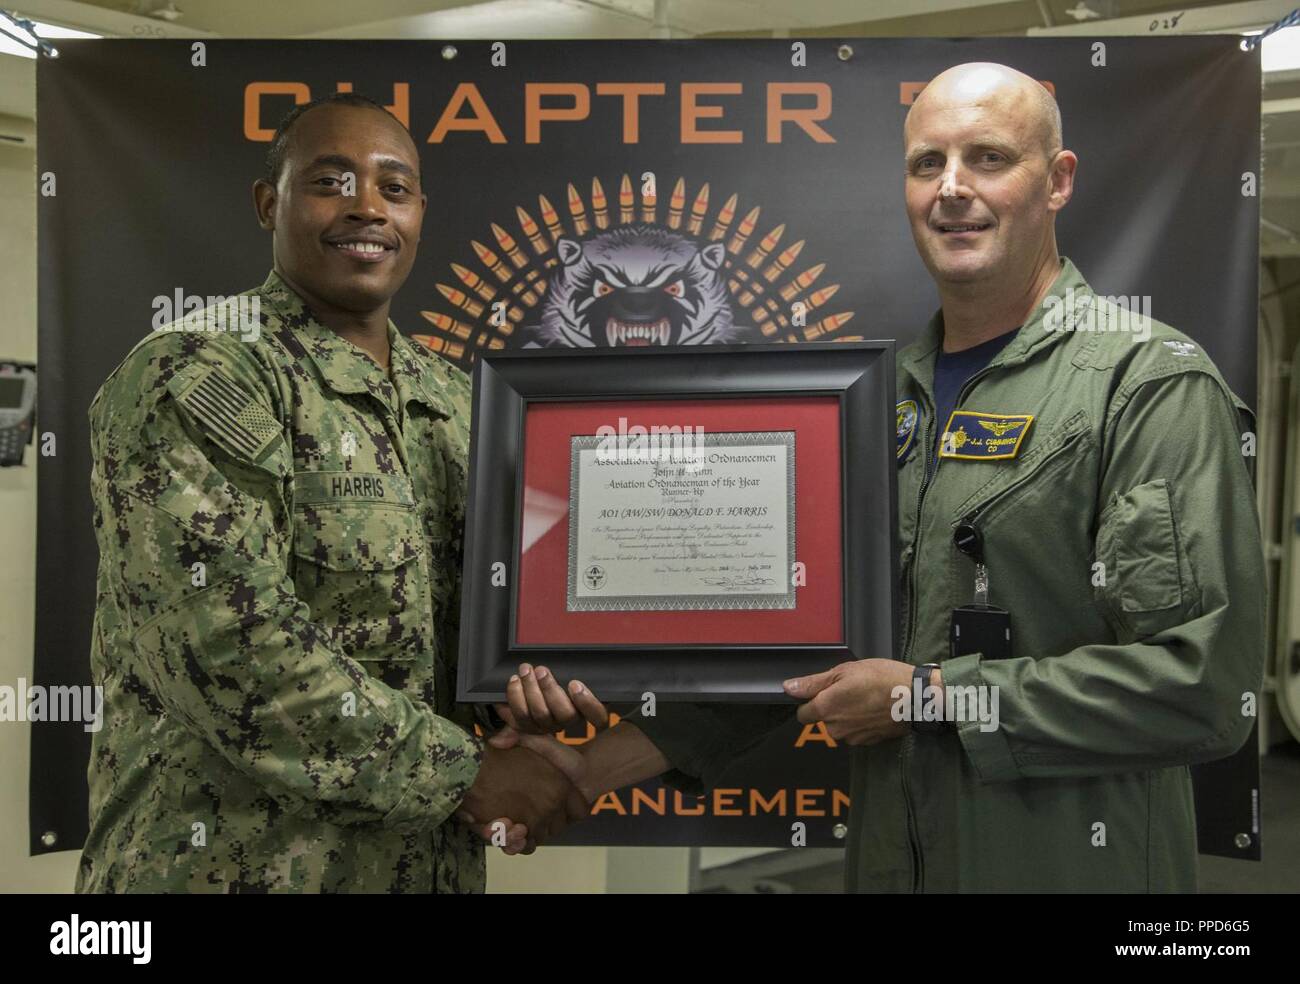 NEWPORT NEWS, Va. (Aug. 23, 2018) Aviation Ordnanceman 1st Class Donald Harris, from Tallahassee, Fla., assigned to USS Gerald R. Ford's (CVN 78) weapons department, left, is awarded Aviation Ordnanceman of the Year by Capt. John J. Cummings, Ford's commanding officer. Harris is will be promoted to chief petty officer next month. Stock Photo